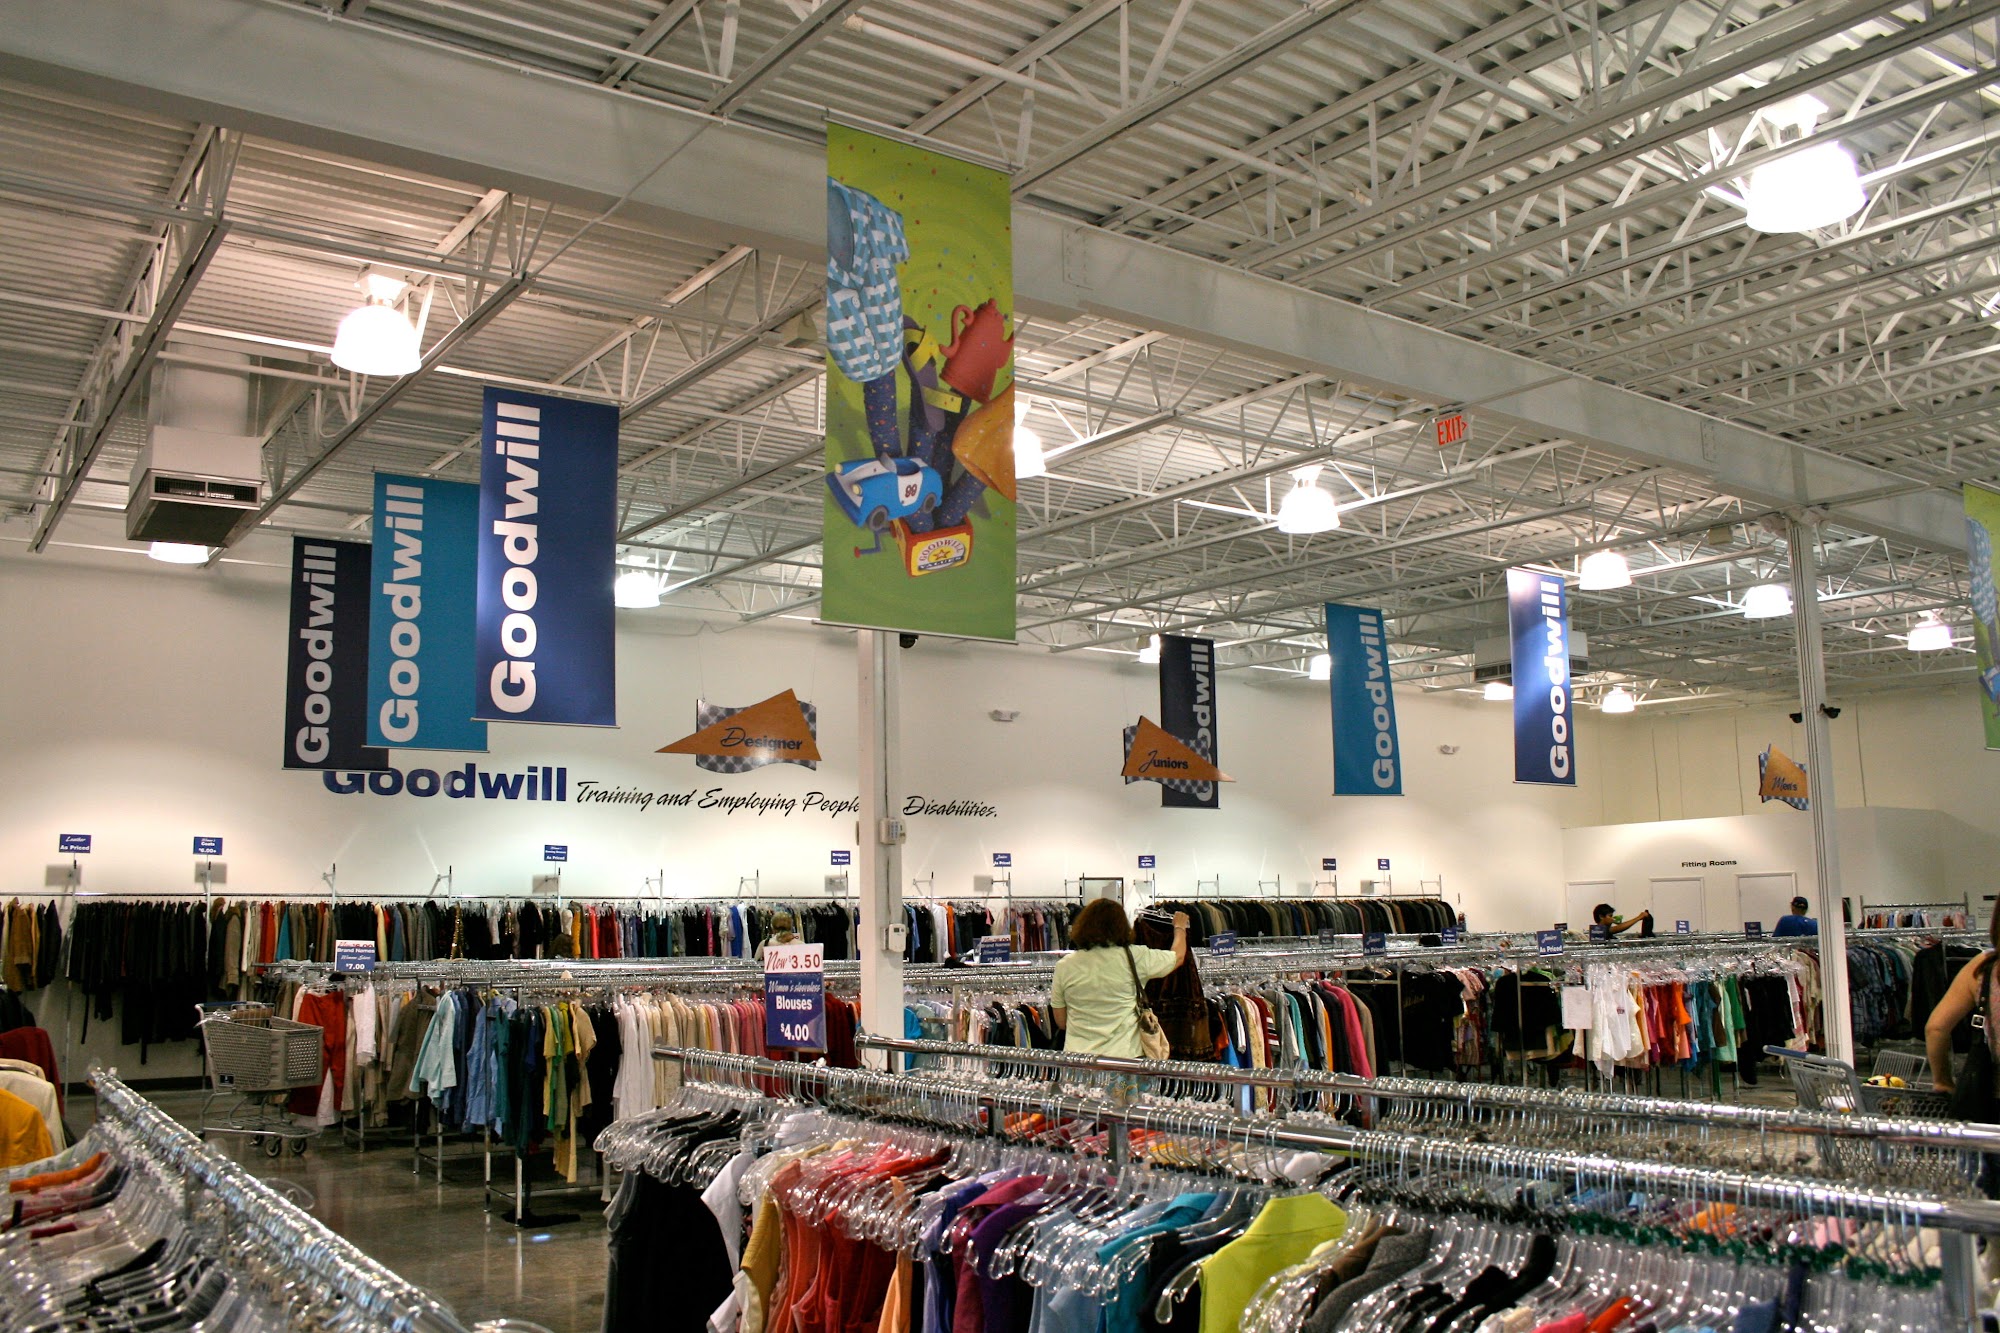 Goodwill - North Miami West Dixie